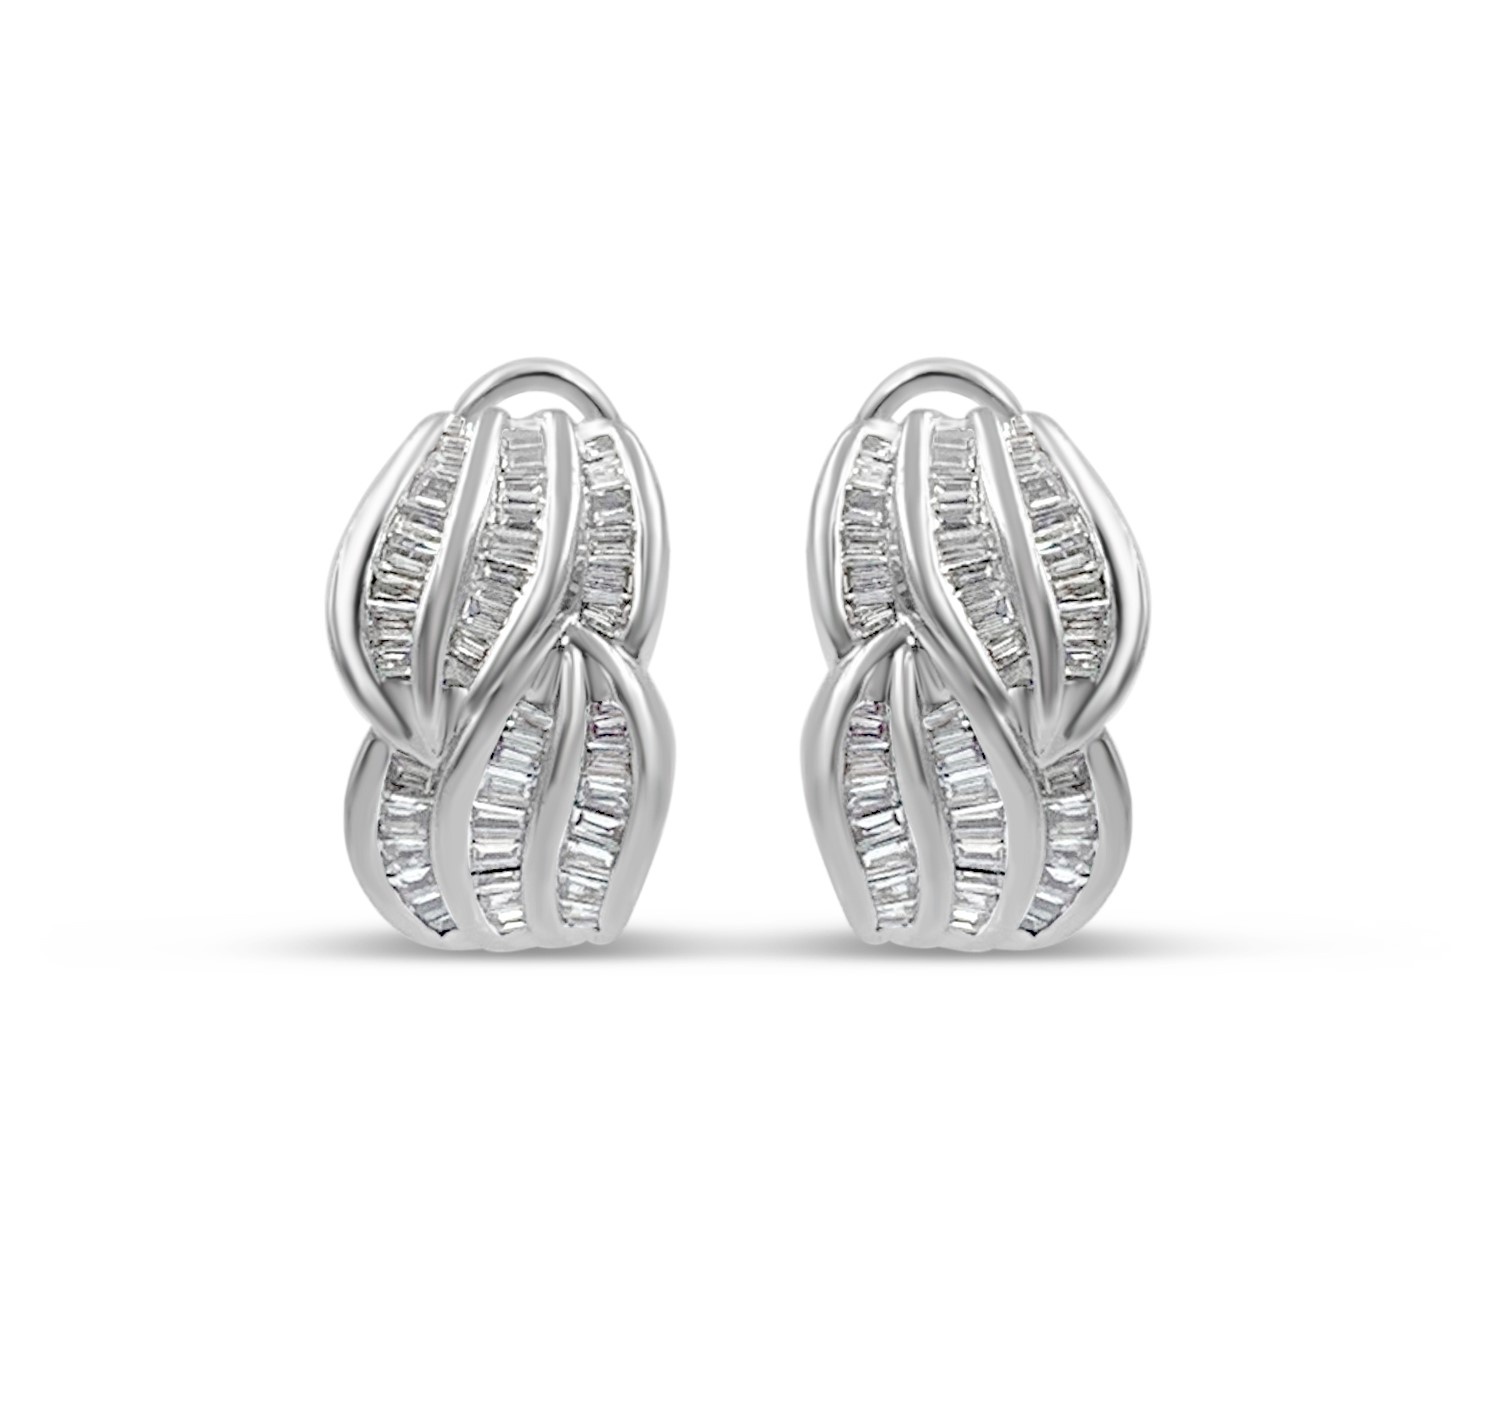 18k white gold earrings with 3,01ct diamonds